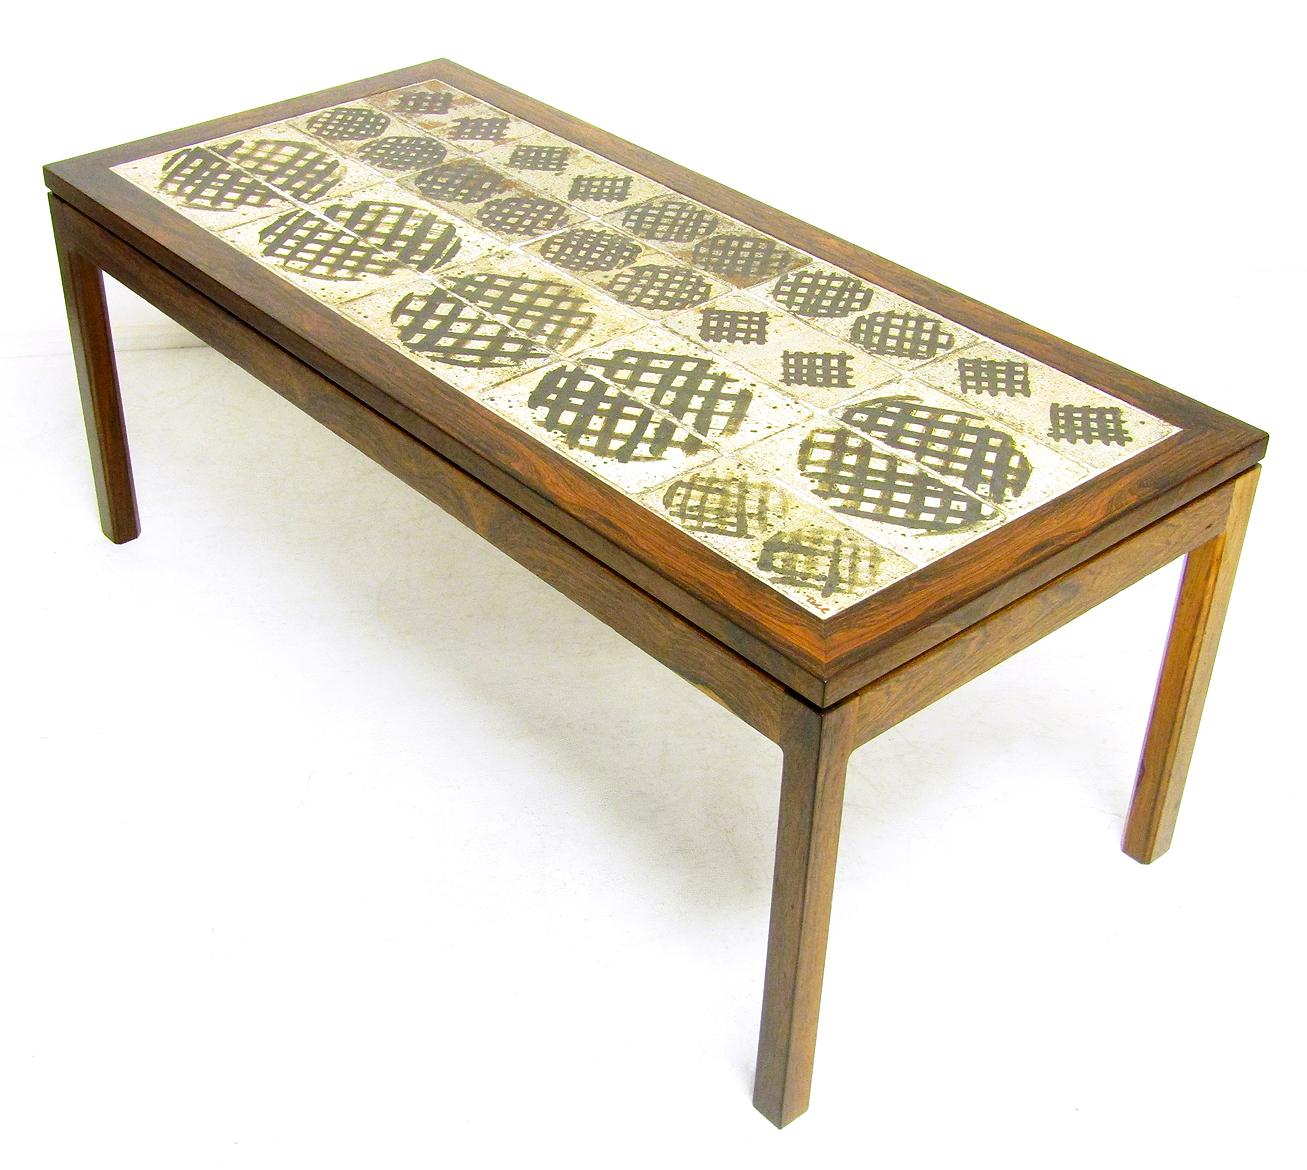 Large 1970s Danish Art Tile Coffee Table in Rosewood by Tue Poulsen & Eric Wörtz For Sale 5